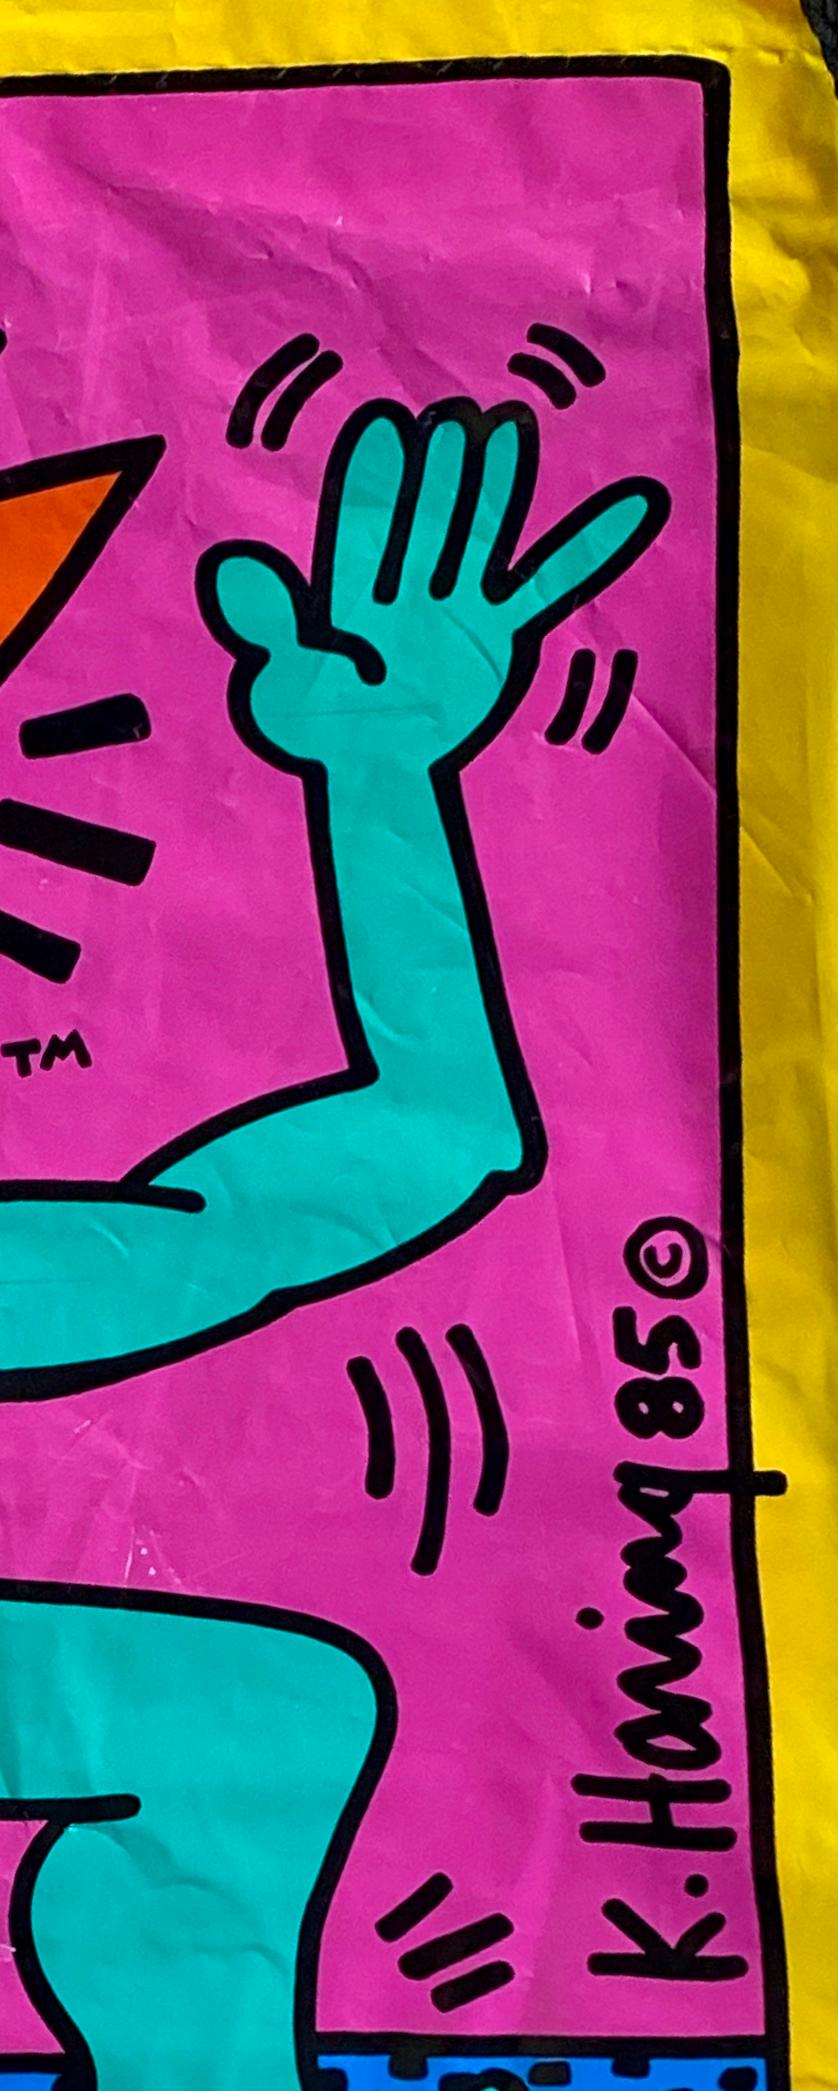 Keith Haring Pop Shop, c.1986:
Vintage original 1980s Pop Shop bag designed & illustrated by Keith Haring. Features a bold 1985 Keith Haring printed signature and standout original Pop shop logos, plus bright lush colors which make for a unique